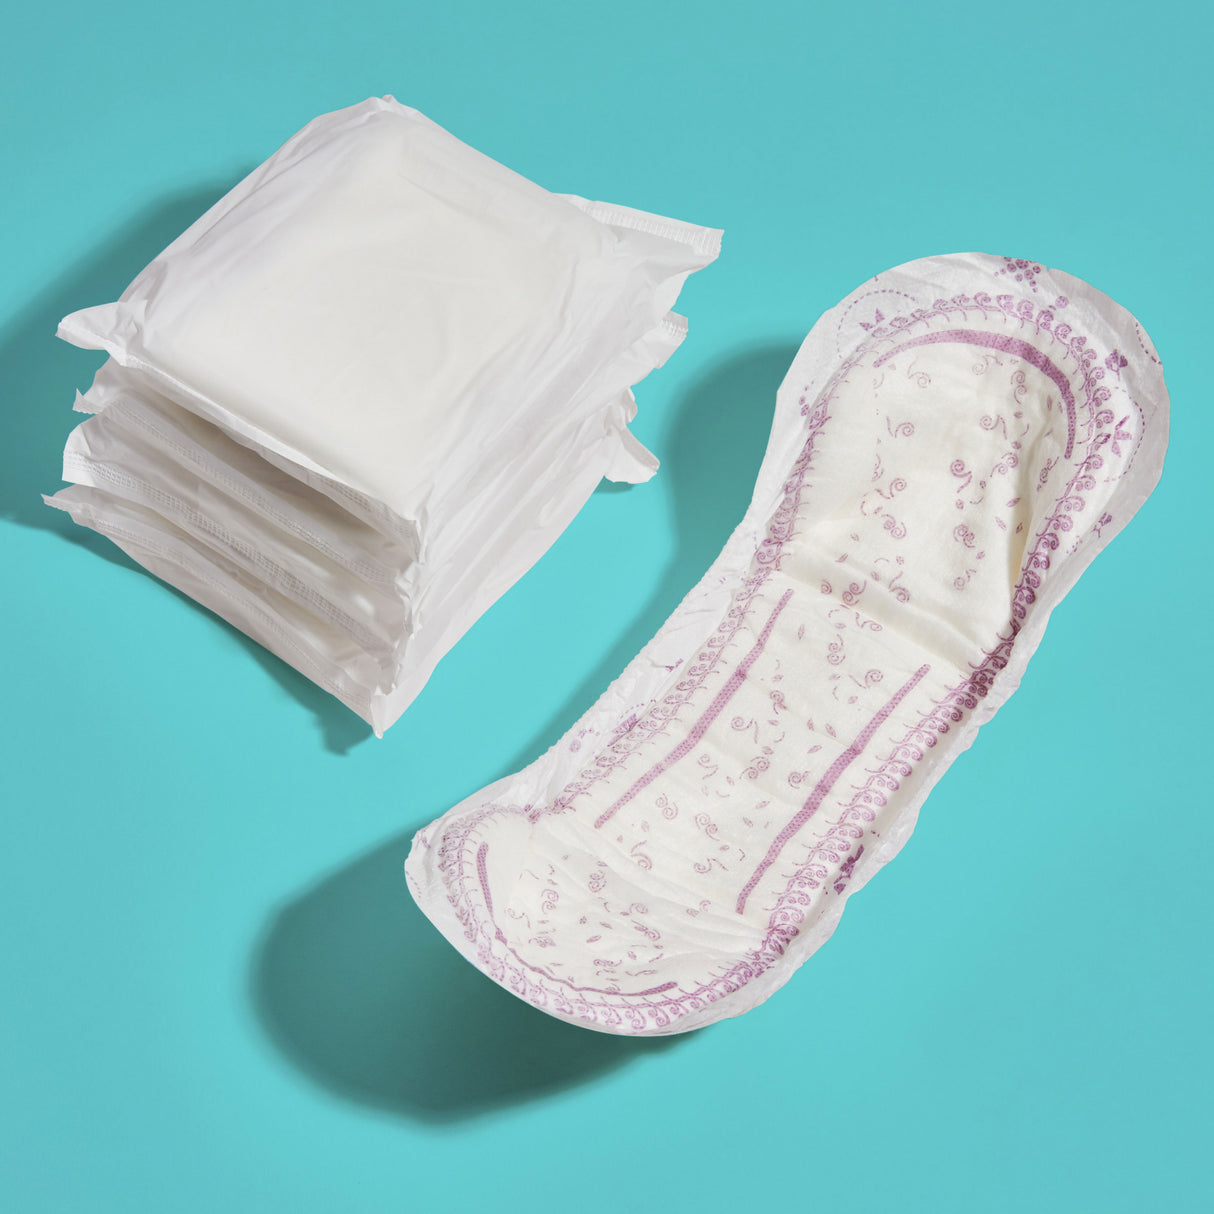 Wholesale Plastic Pants Incontinence, Sanitary Pads, Feminine Care Products  